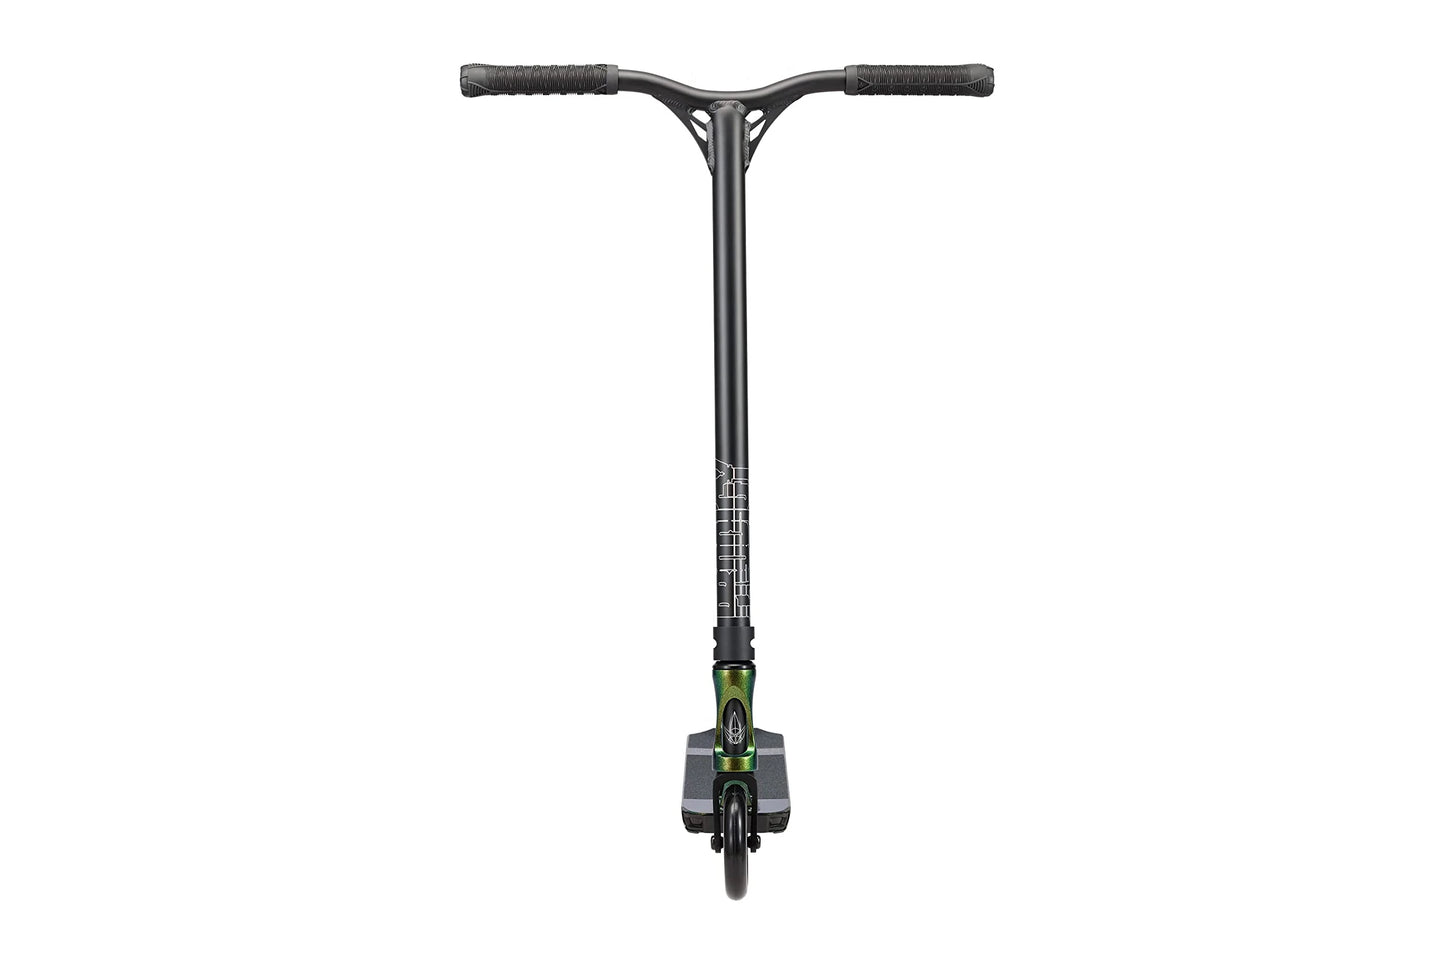 envy complete scooter prodigy s9 toxic trottinette